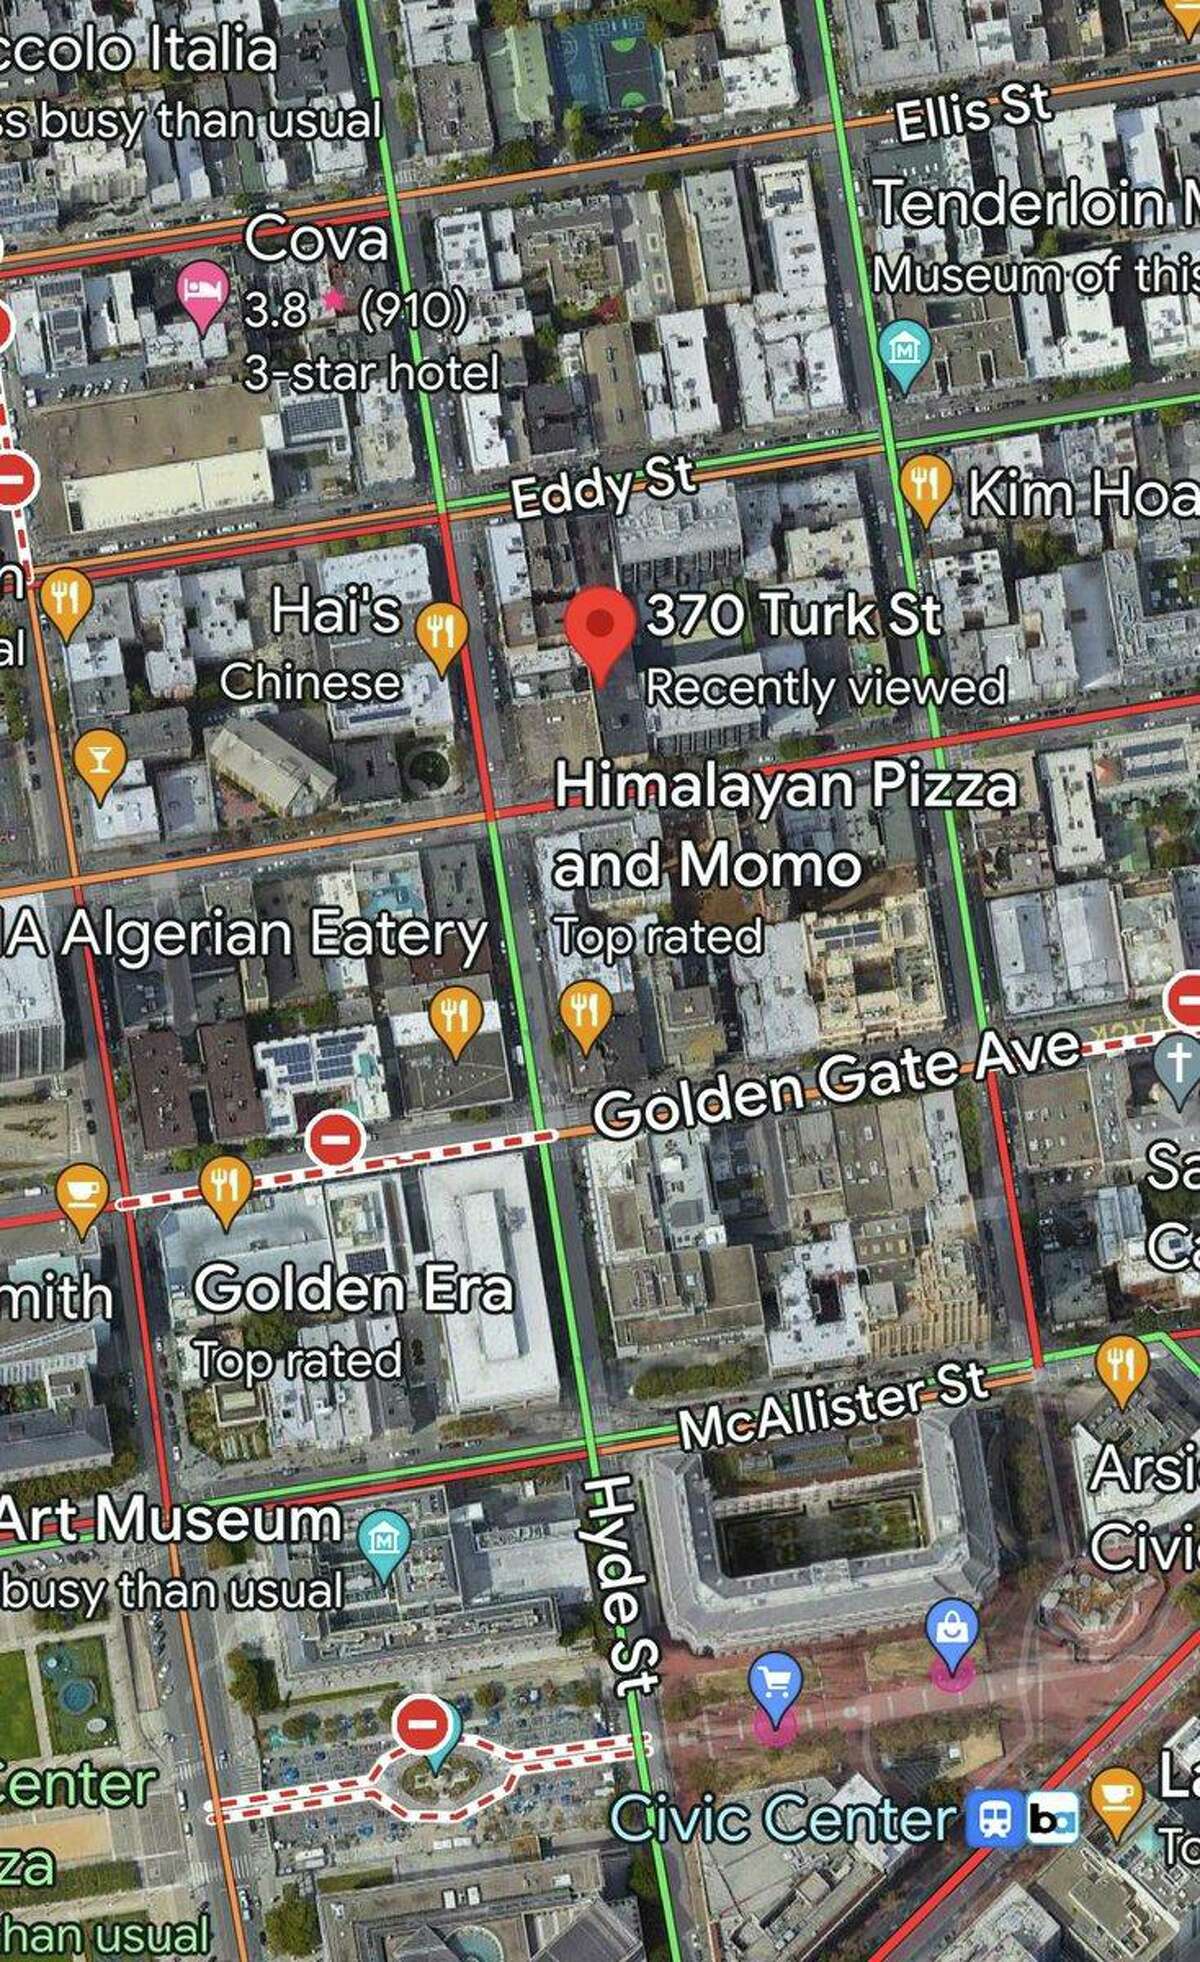 A small fire broke out at this location, 370 Turk St., in the Tenderloin.